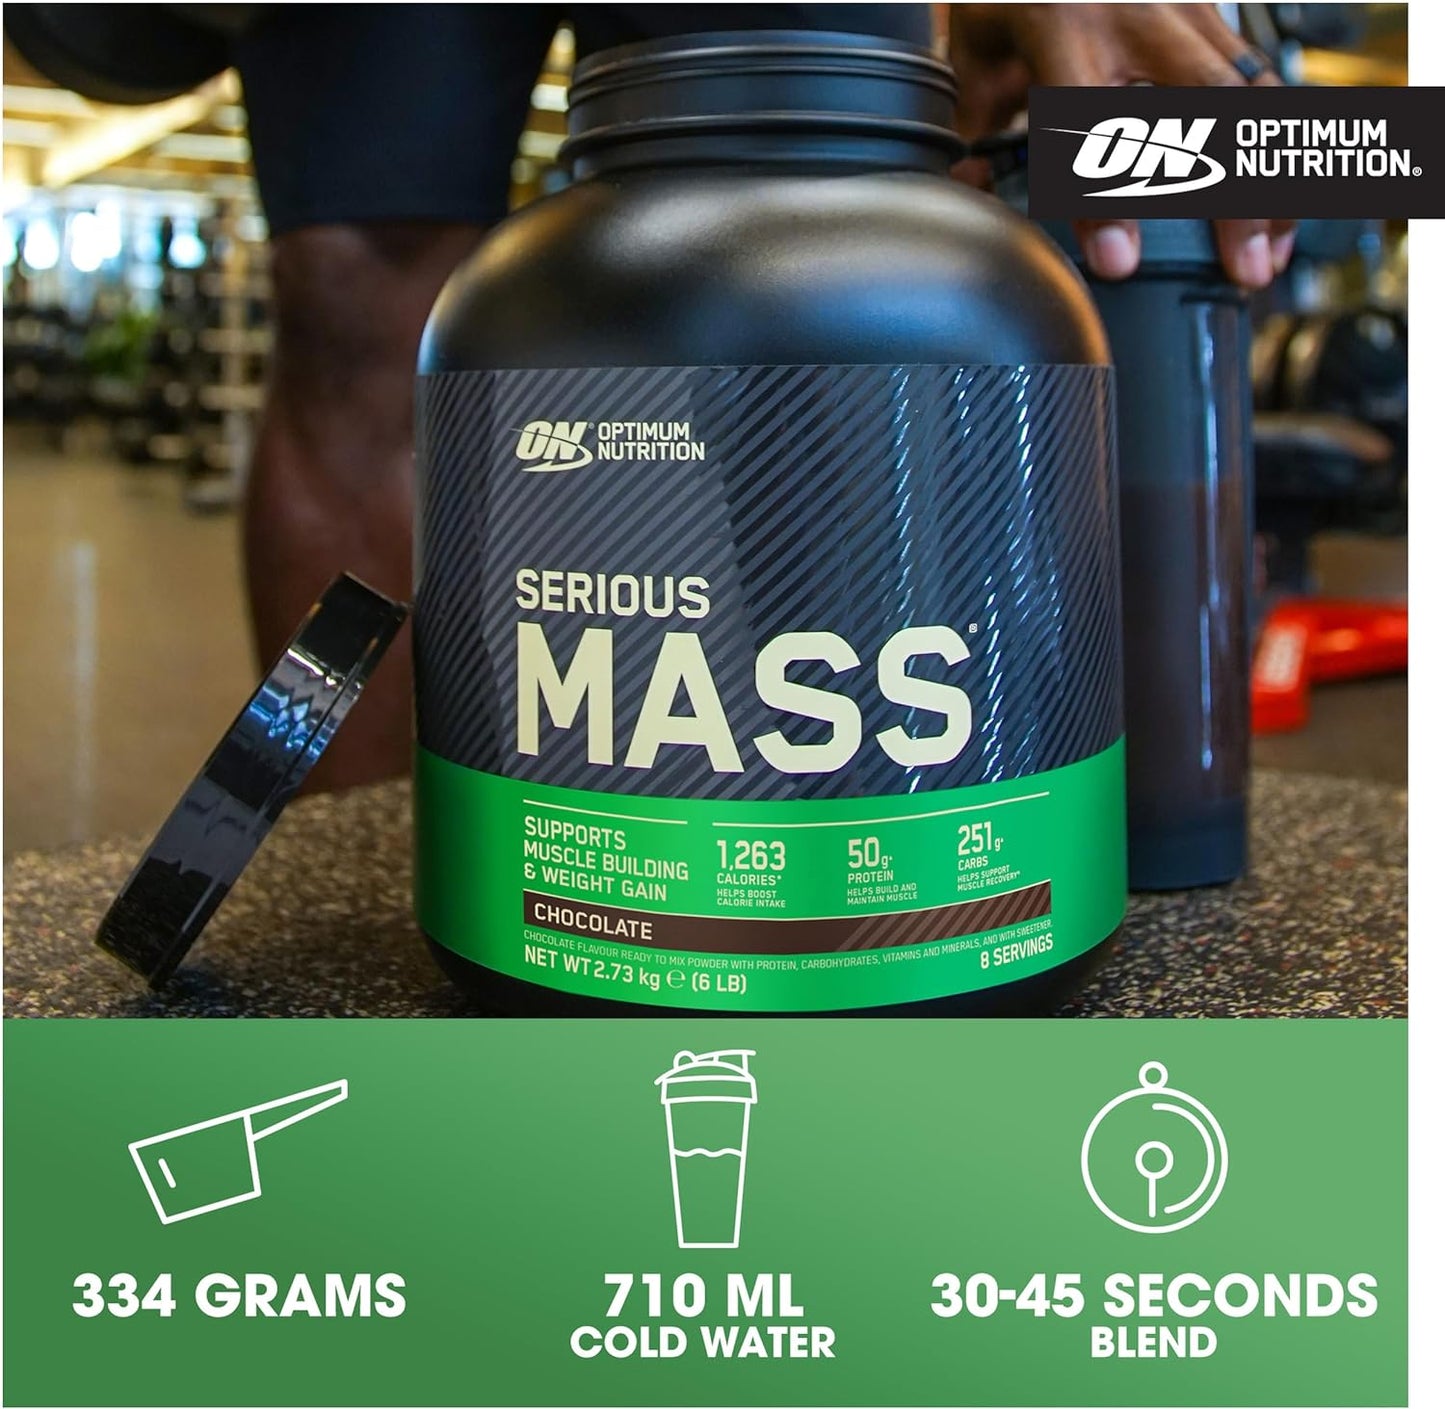 Serious Mass Protein Powder with Creatine, Glutamine, 25 Vitamins and Minerals, Chocolate Flavour, 16 Servings, 5.45KG